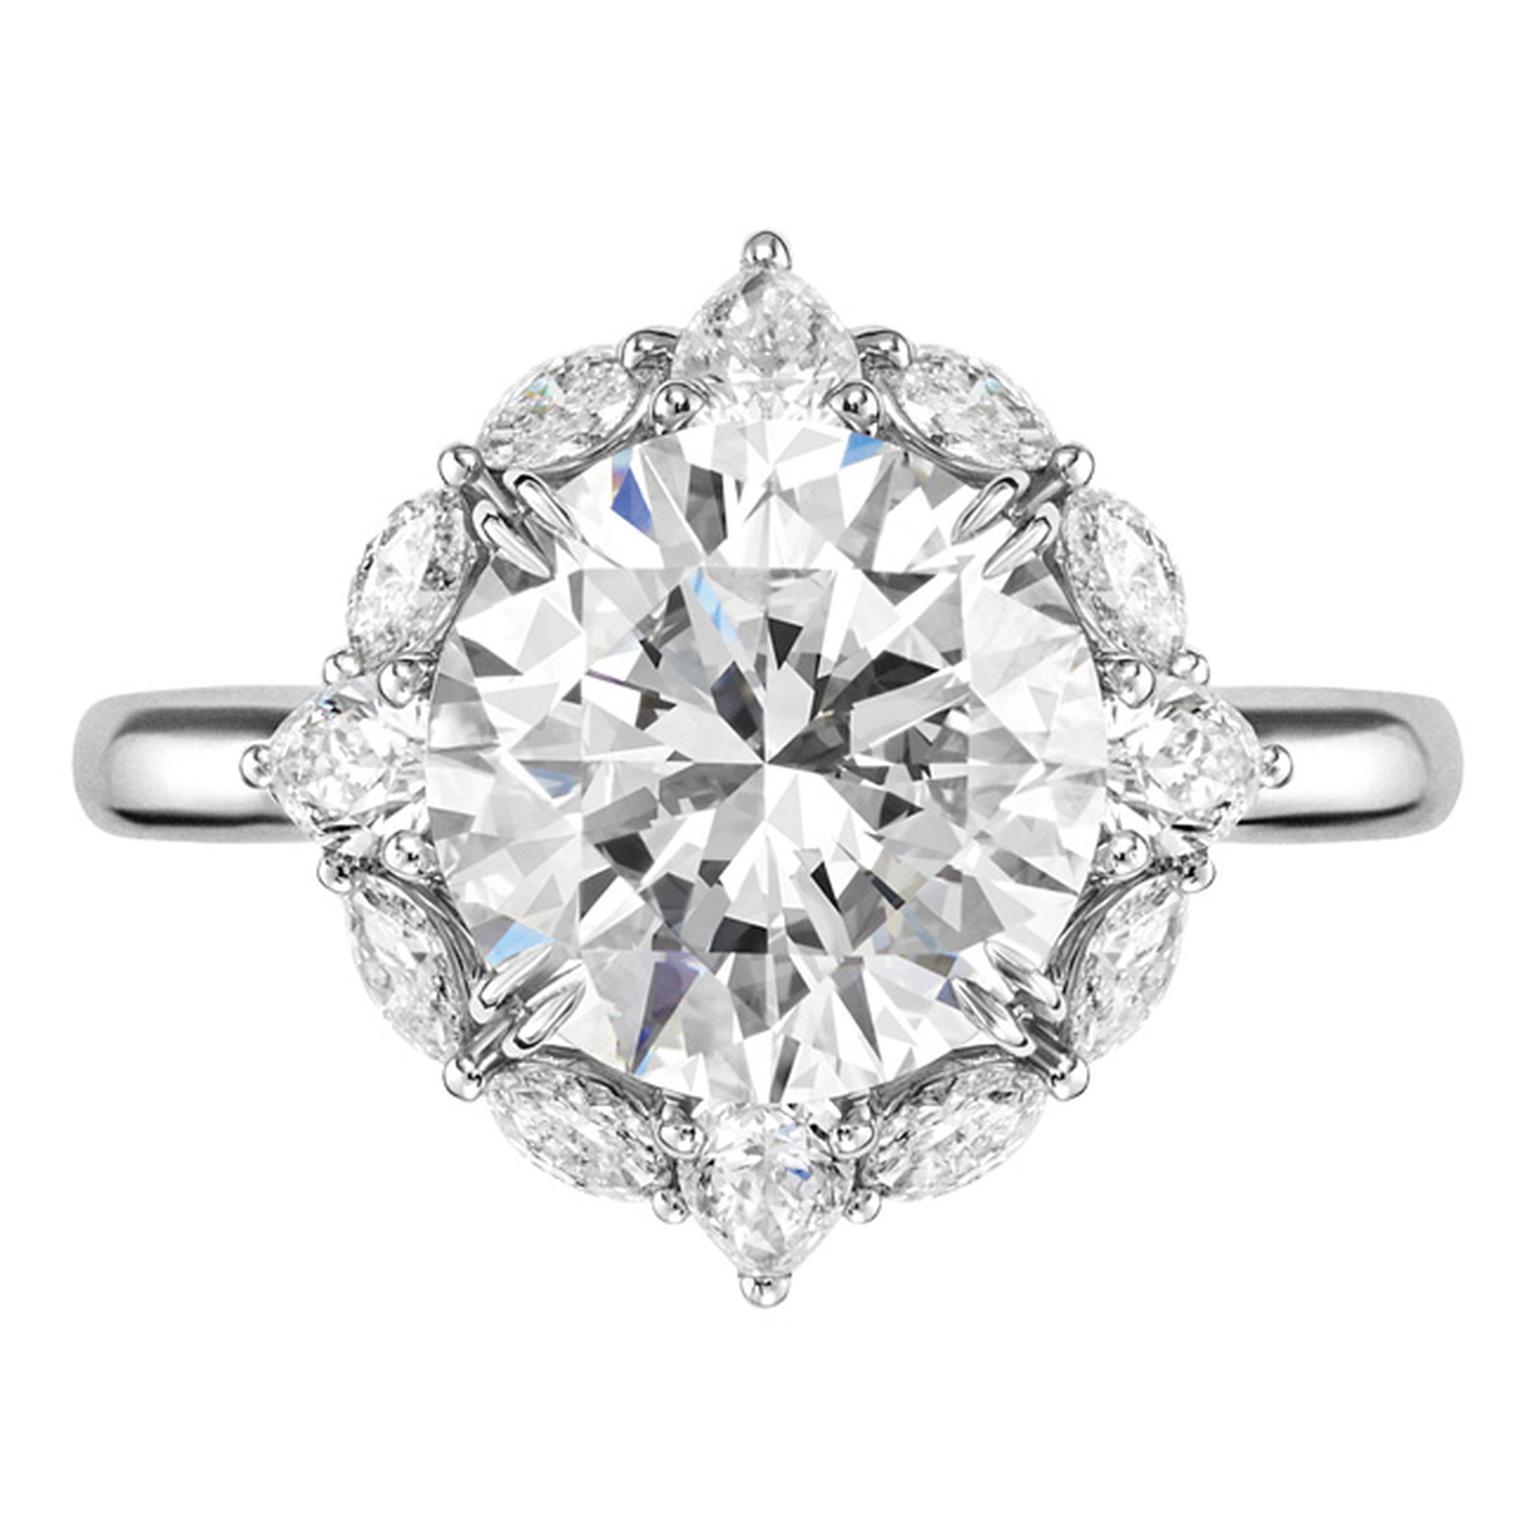 Harry Winston Ultimate Bridal Collection diamond ring_20131017_Main